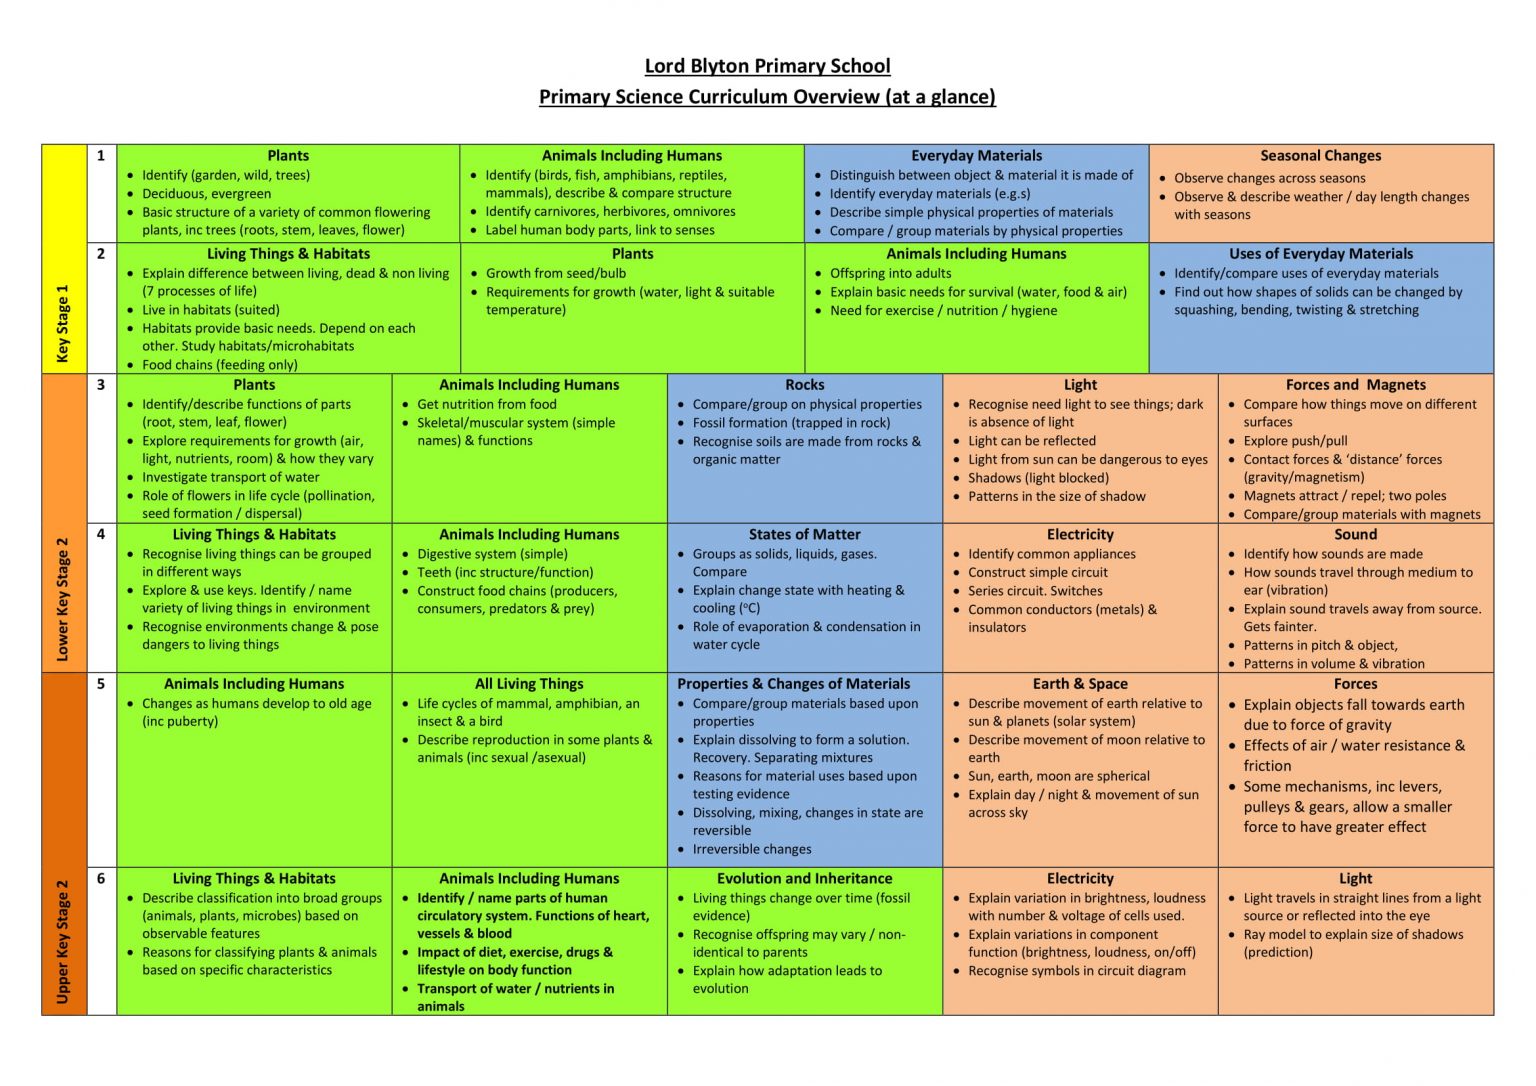 Science Curriculum Overview Lord Blyton Primary School